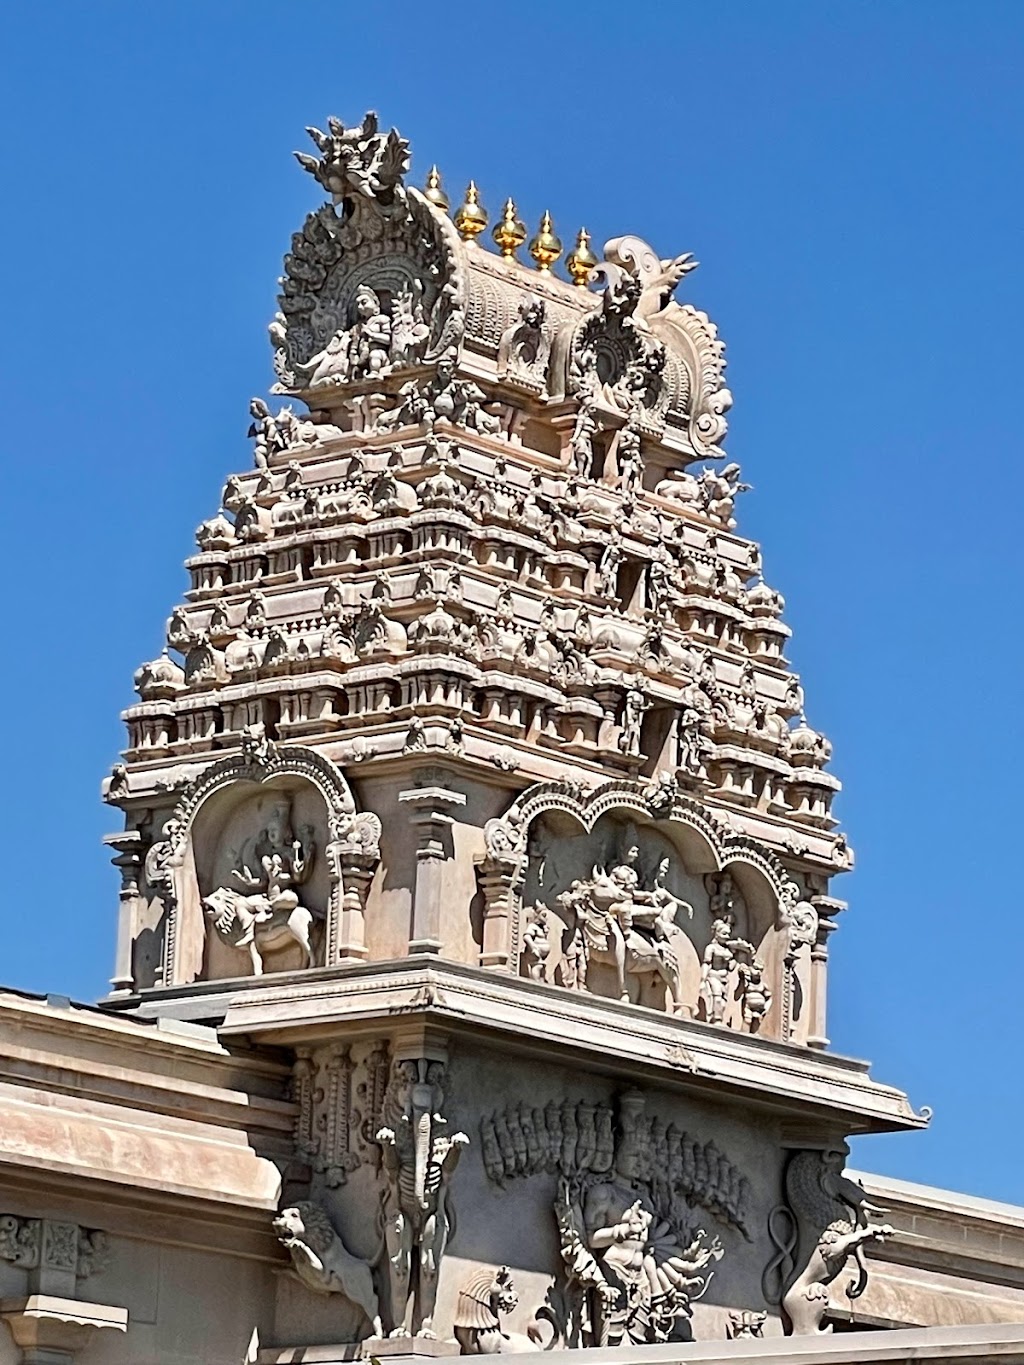 Hindu Temple of Central Indiana | 3350 N German Church Rd, Indianapolis, IN 46235, USA | Phone: (317) 891-9199